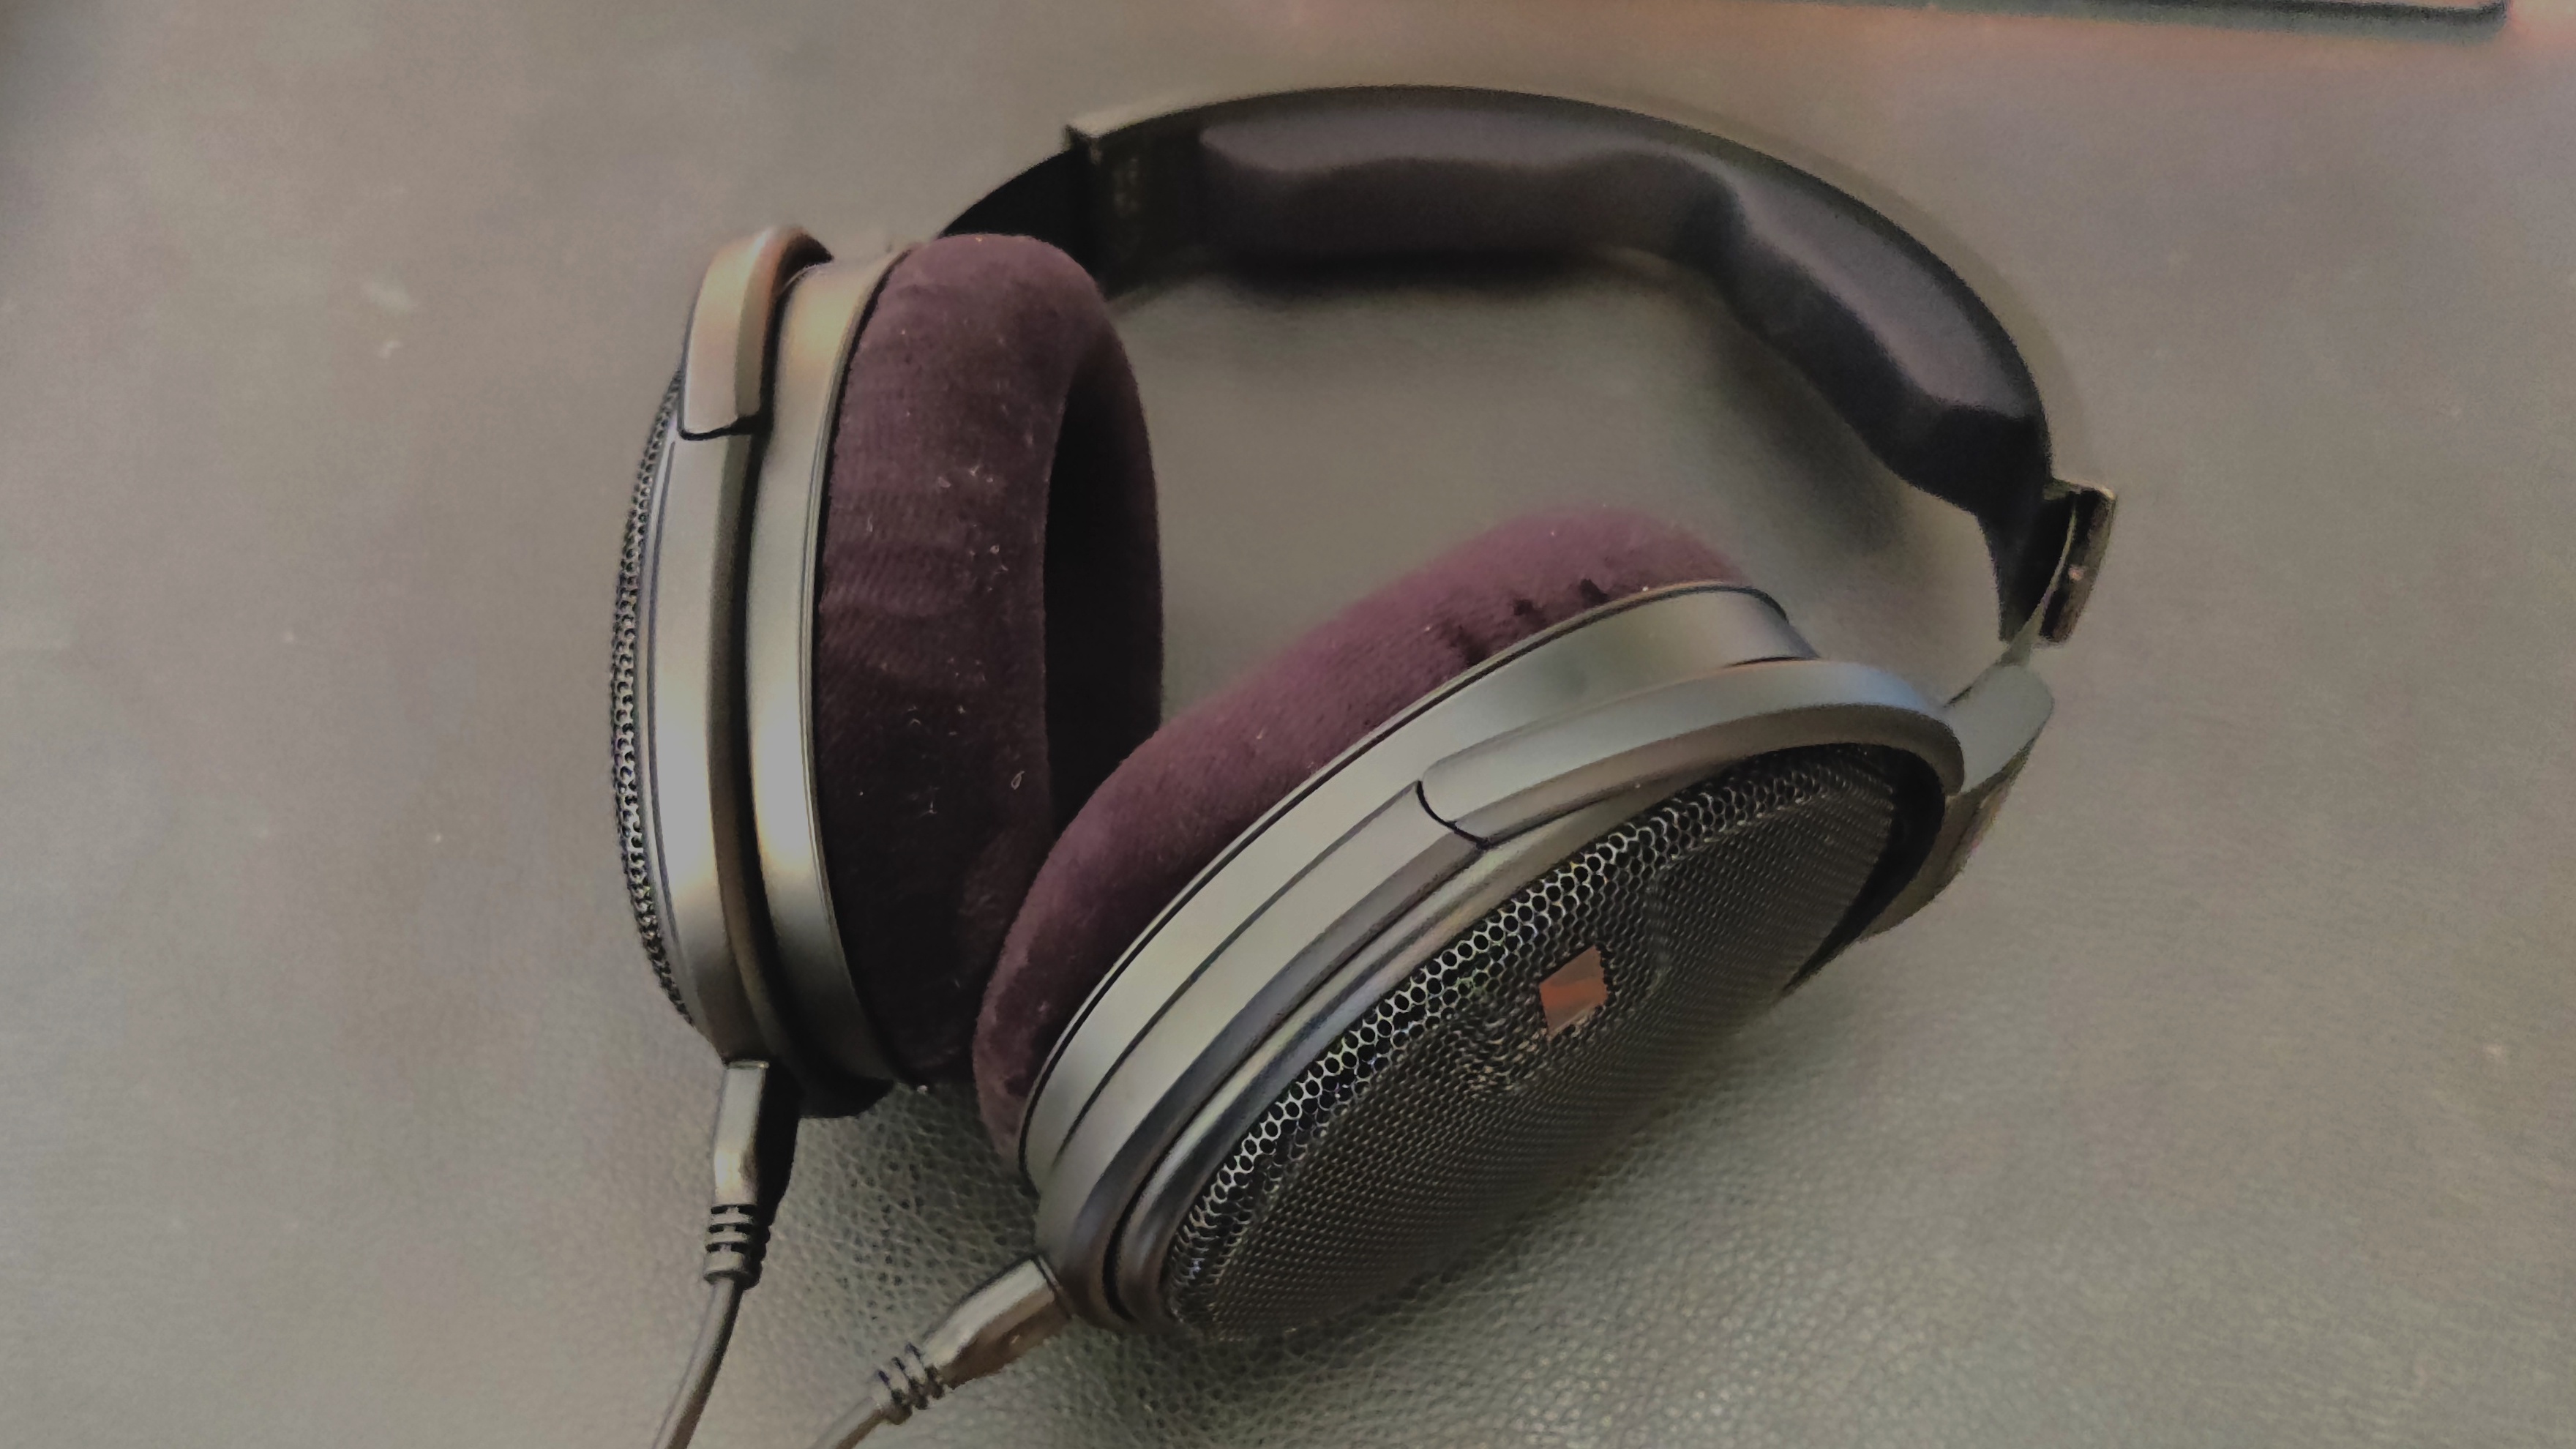 The Sennheiser HD-660S2 headhphones pictured on a wooden surface.